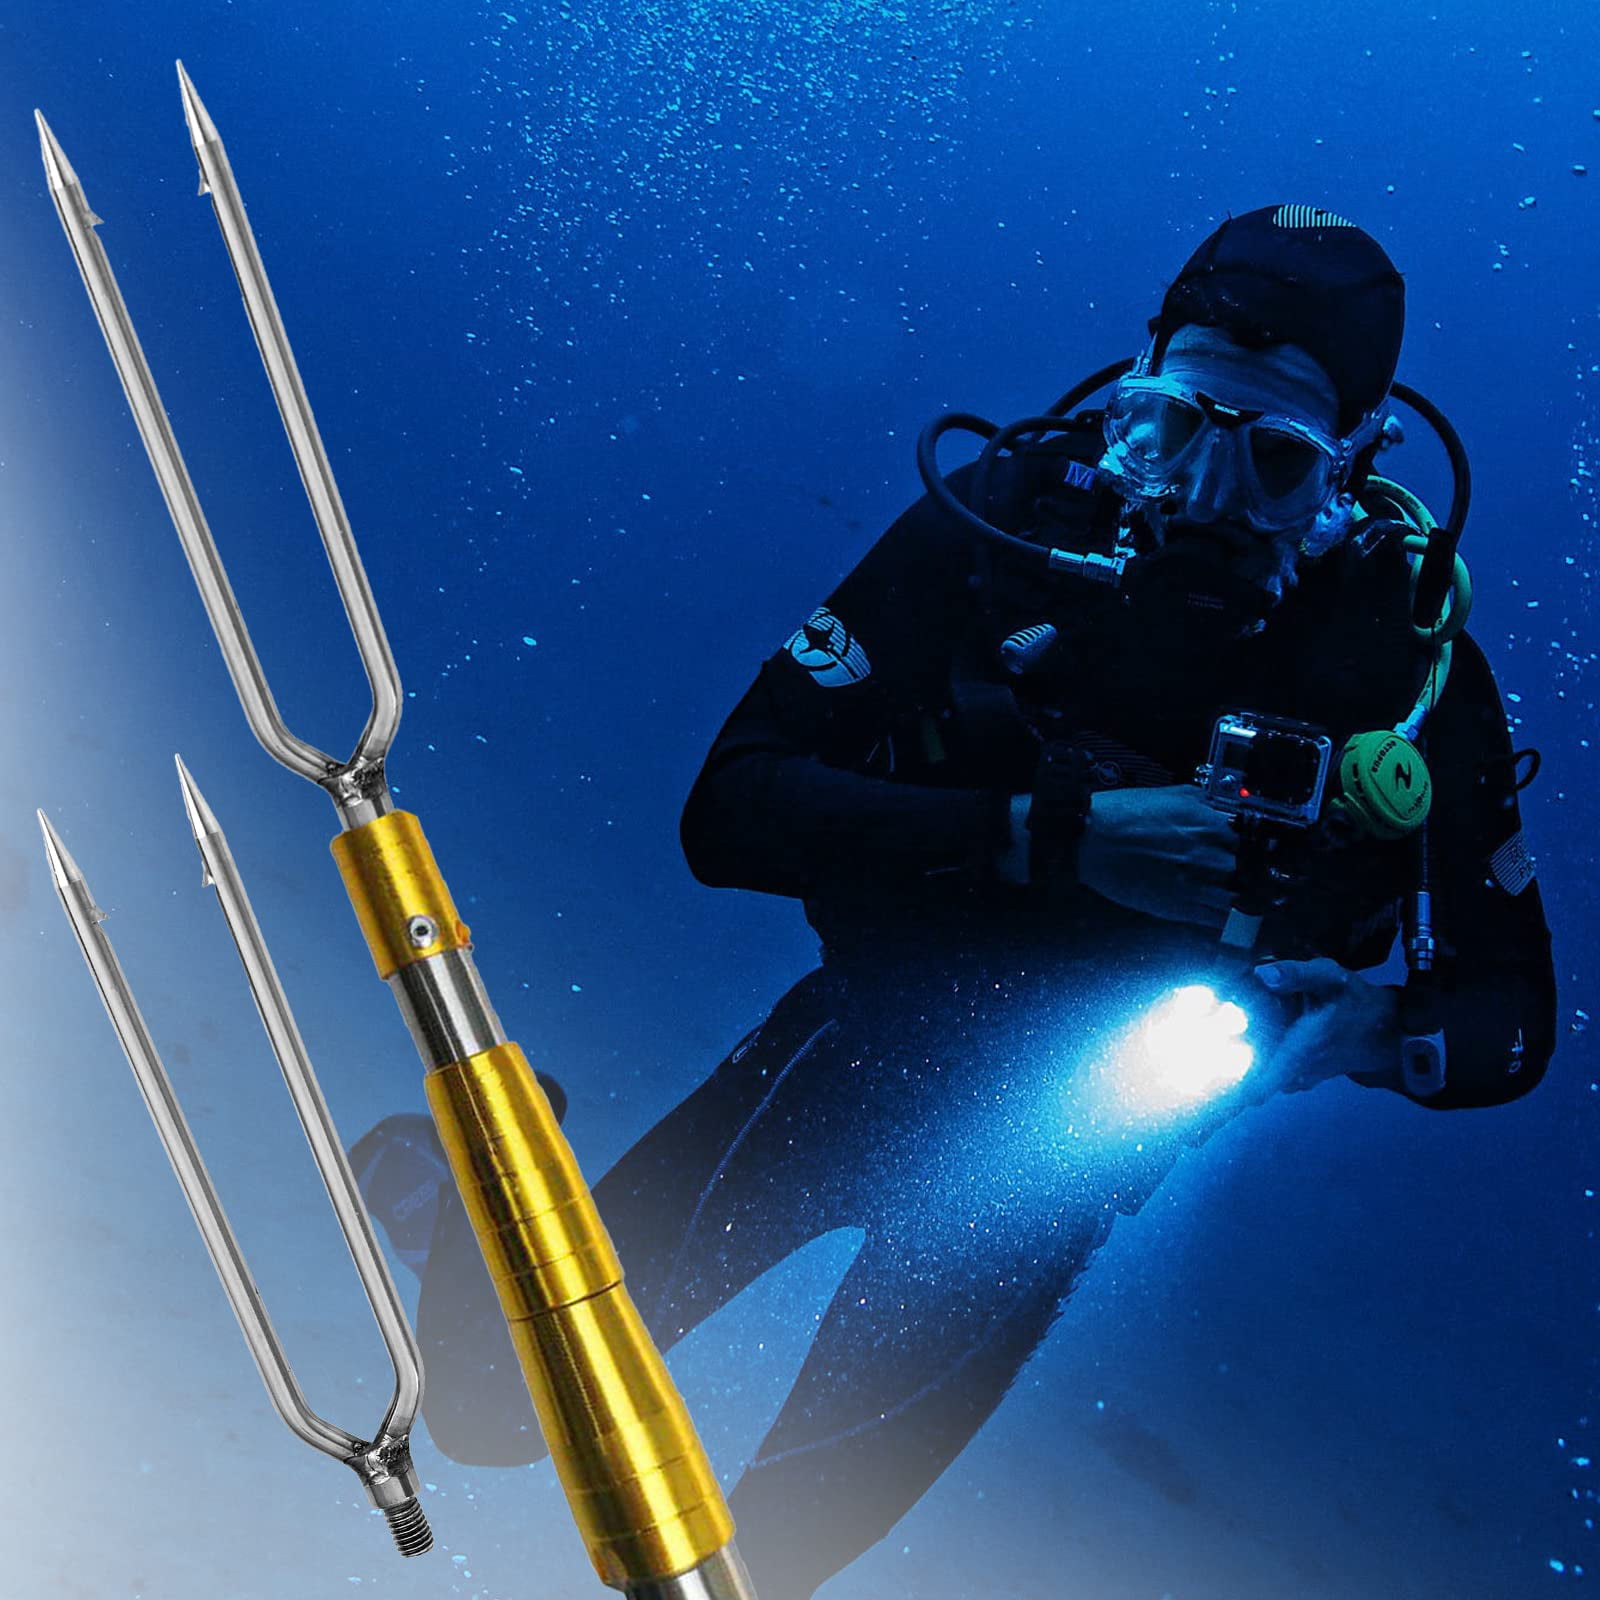 2Pcs 3 Prongs Fishing Harpoon Stainless Steel Fishing Spear Head With Hook  Barbed Harpoon Sharp Fish Fork Spearhead Fishing Tool